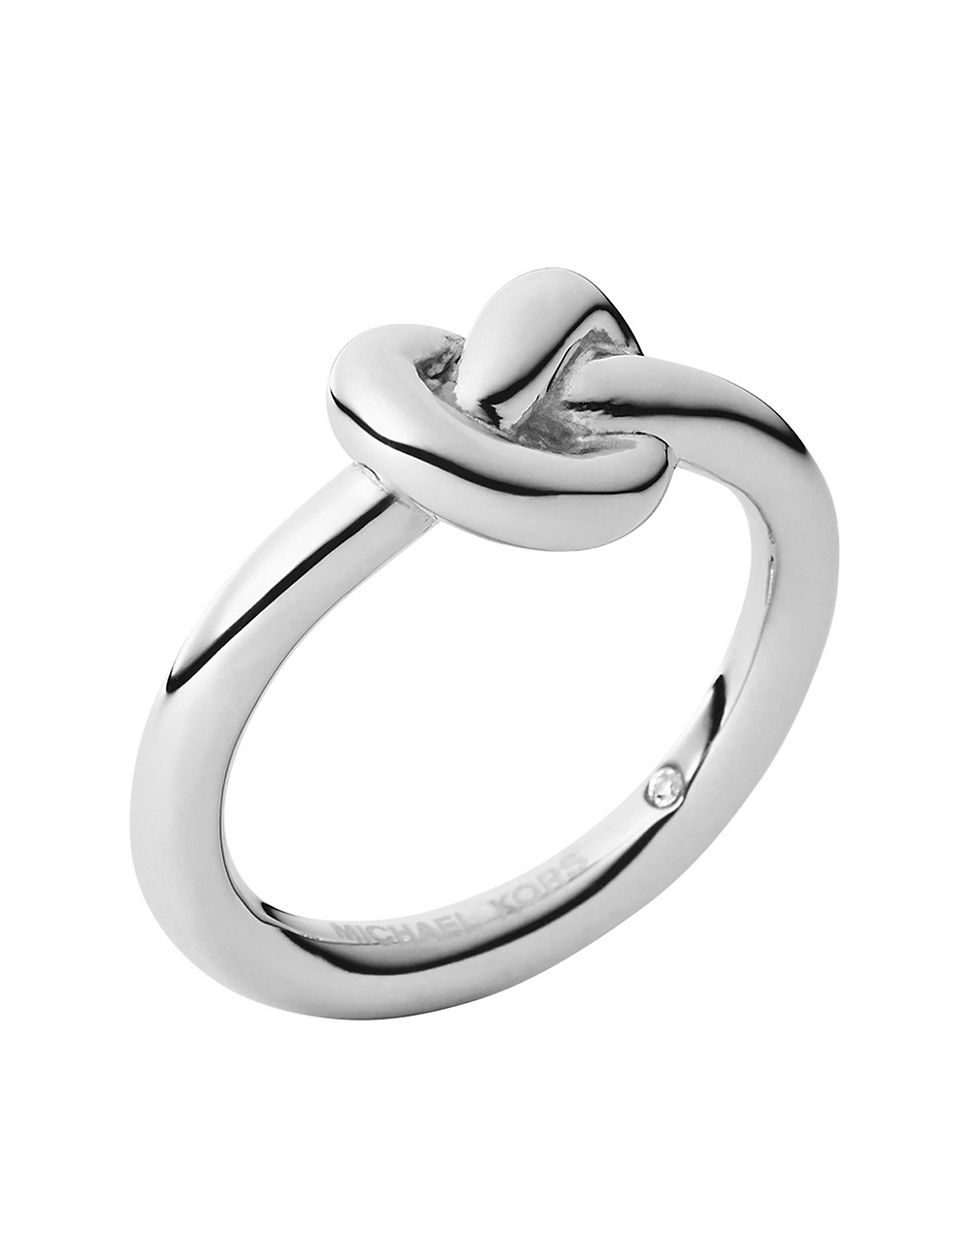 Michael Kors Knot Ring in Silver